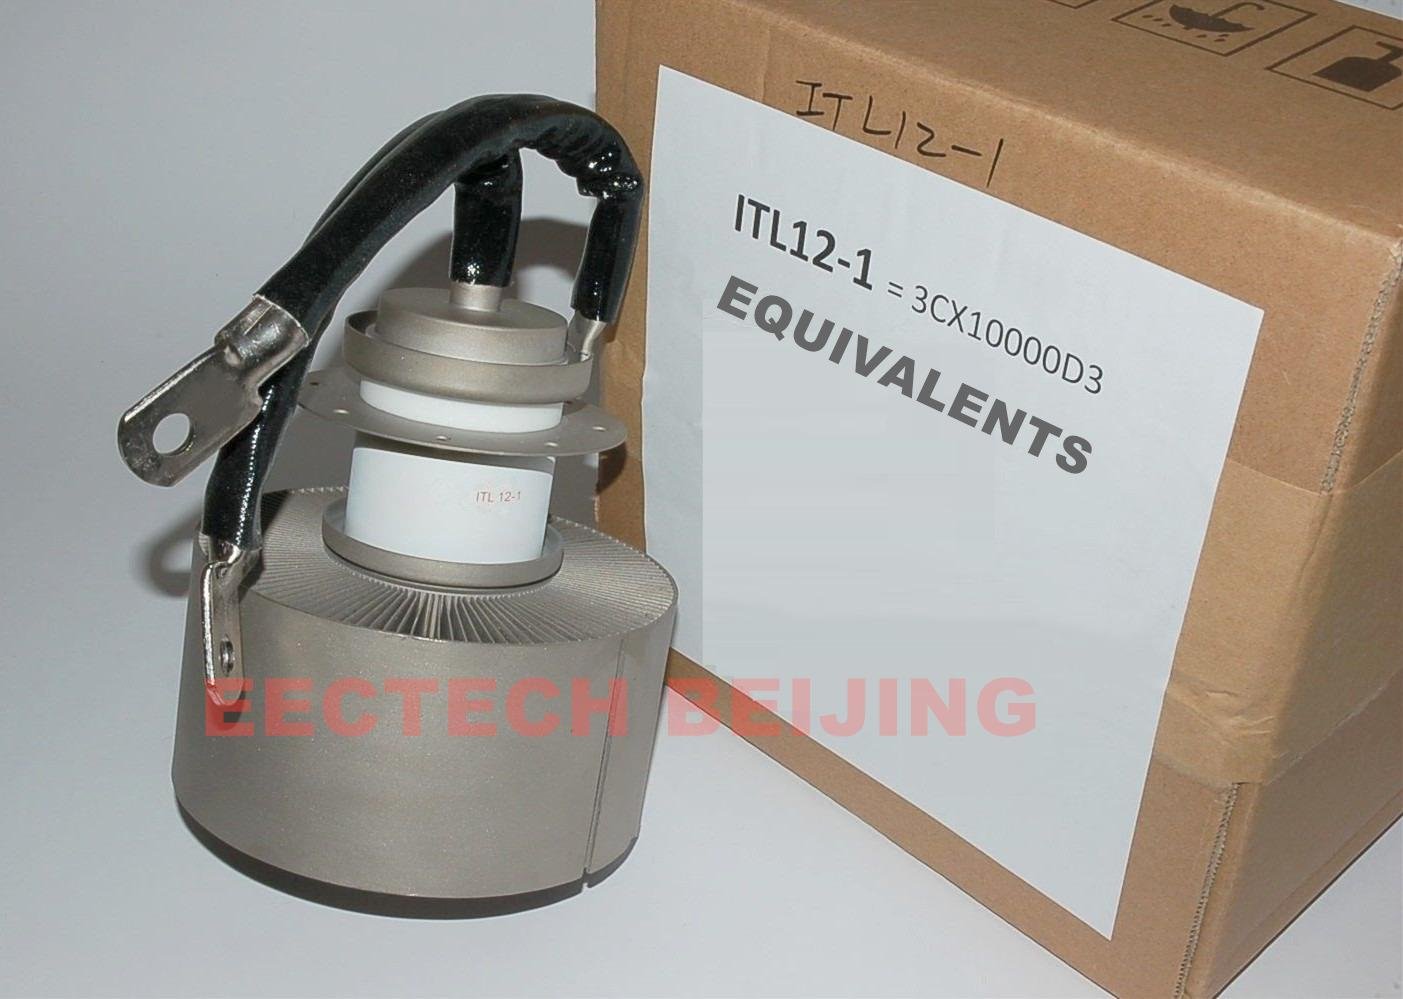 Power triode ITL15-2, electron tube equivalent to AML15-2, for RF heating 5